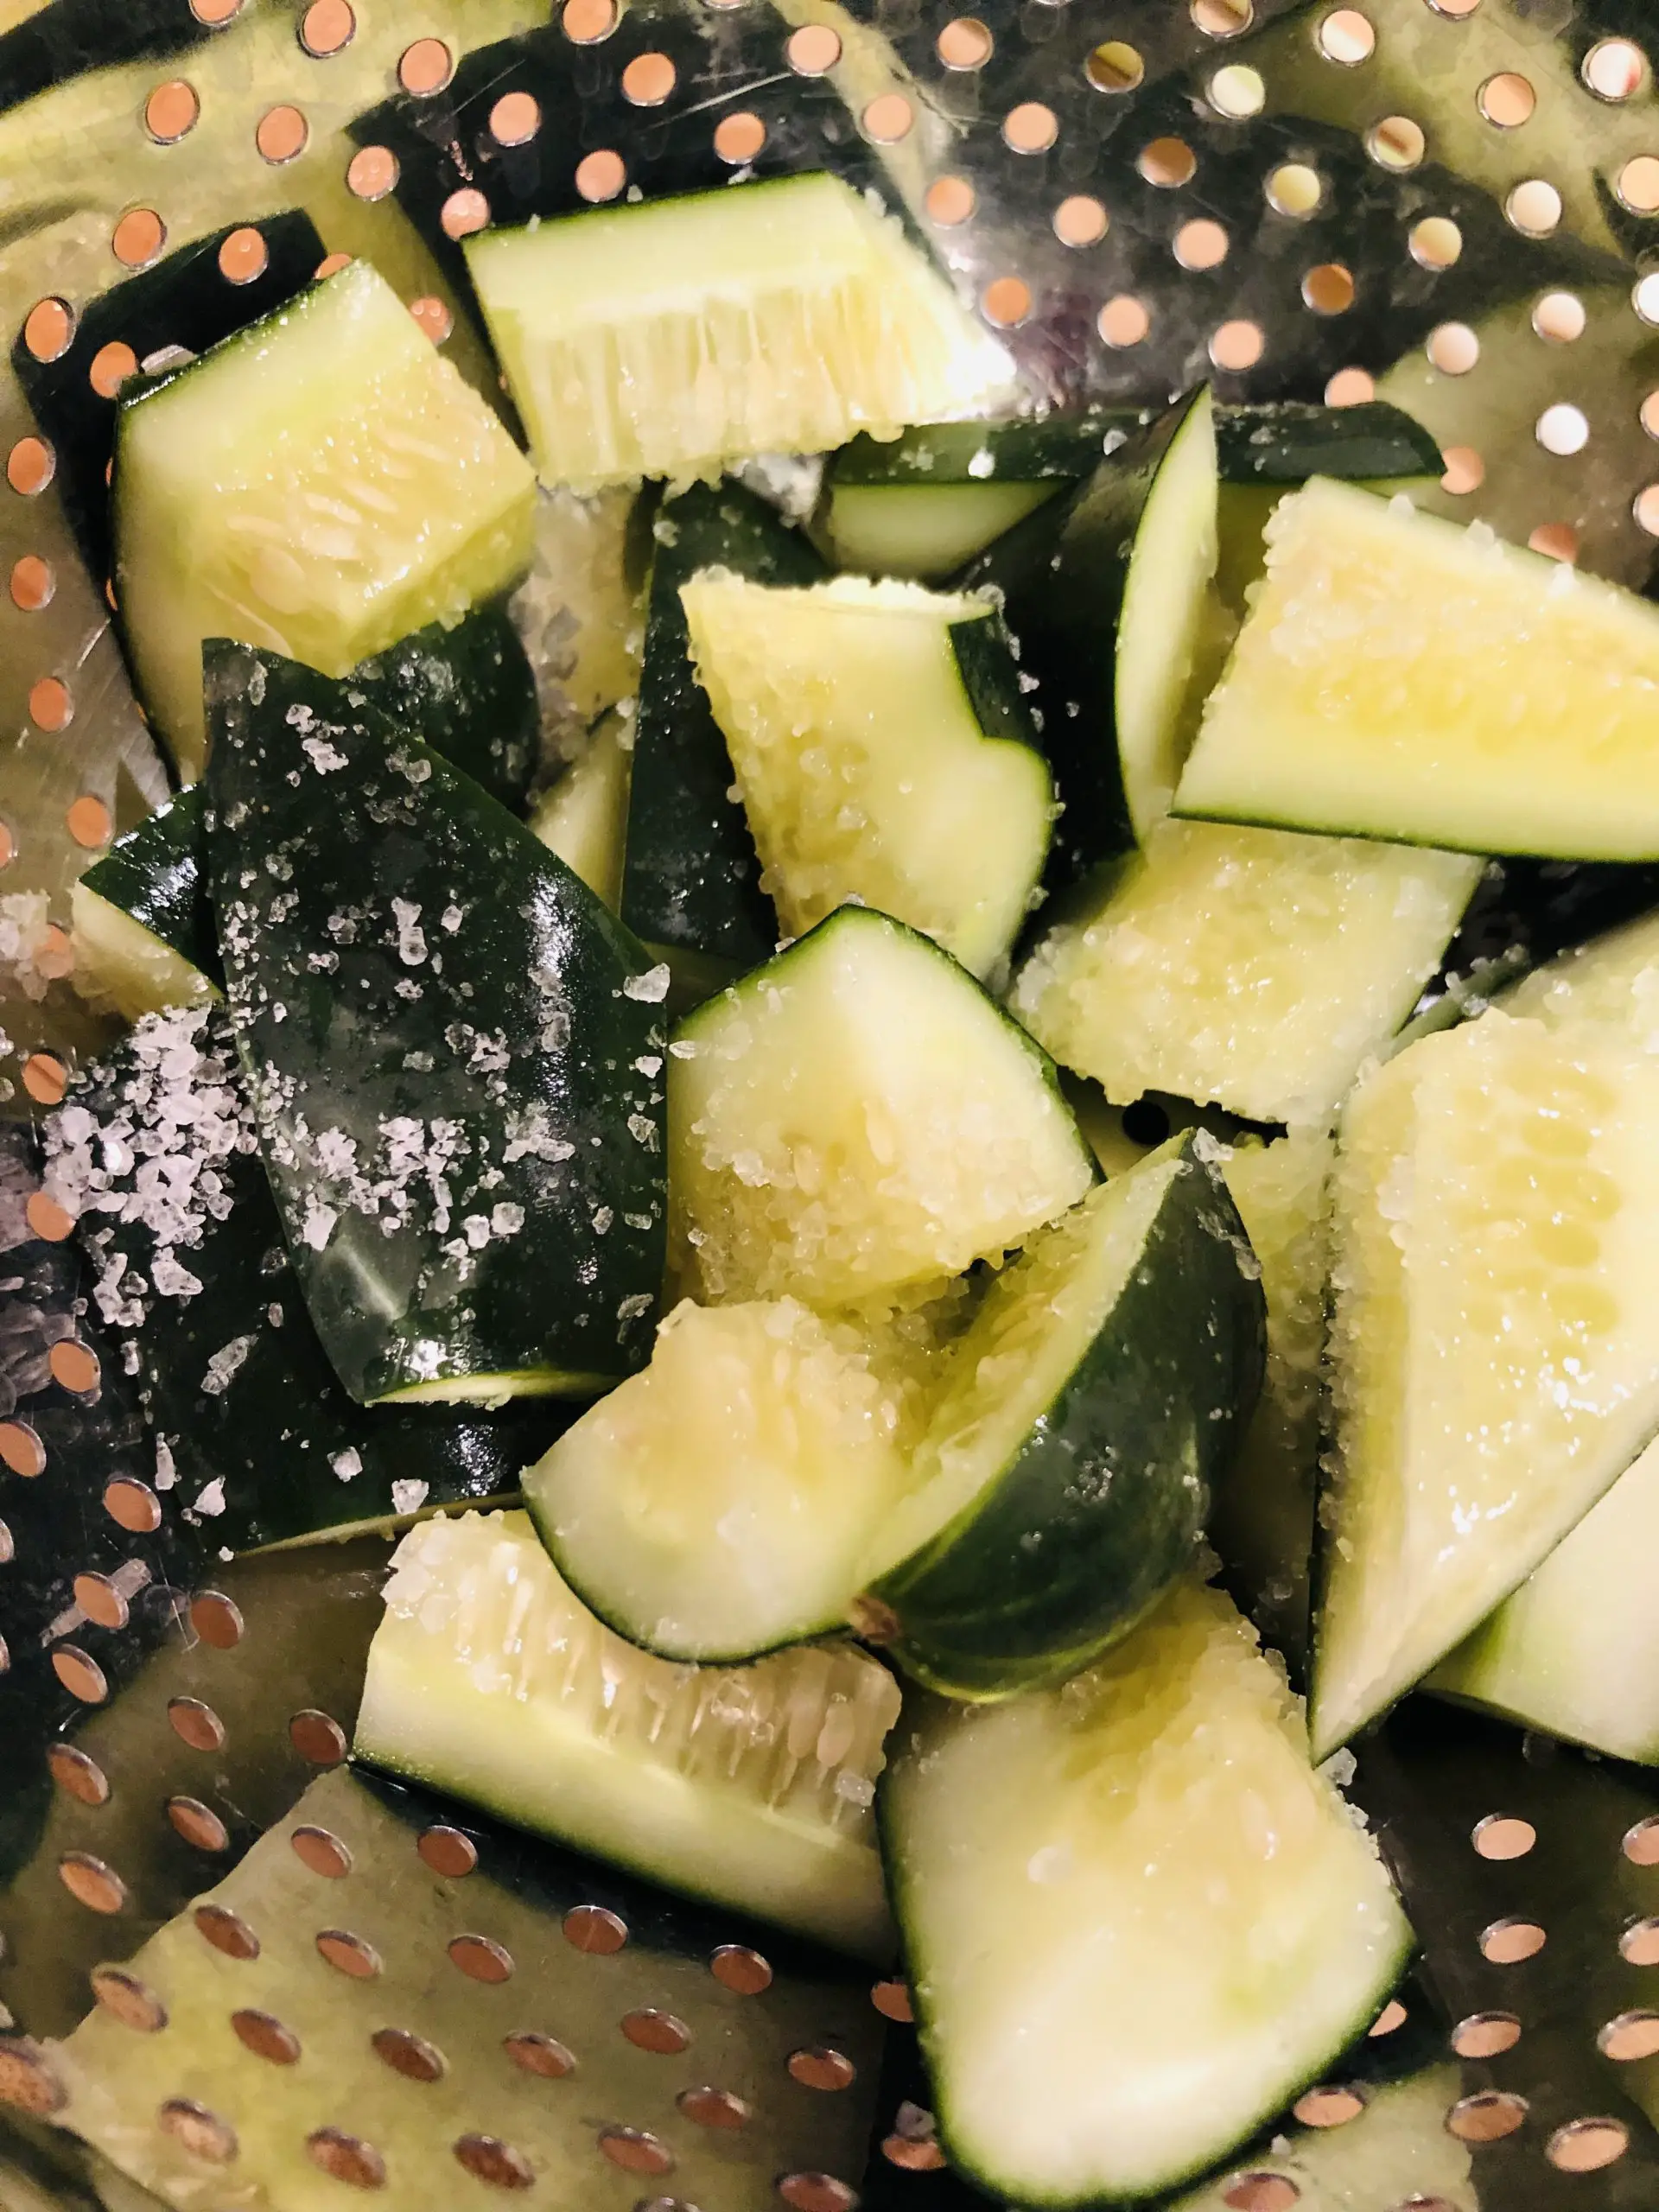 cut up pieces of cucumber sprinkled with salt in a colander